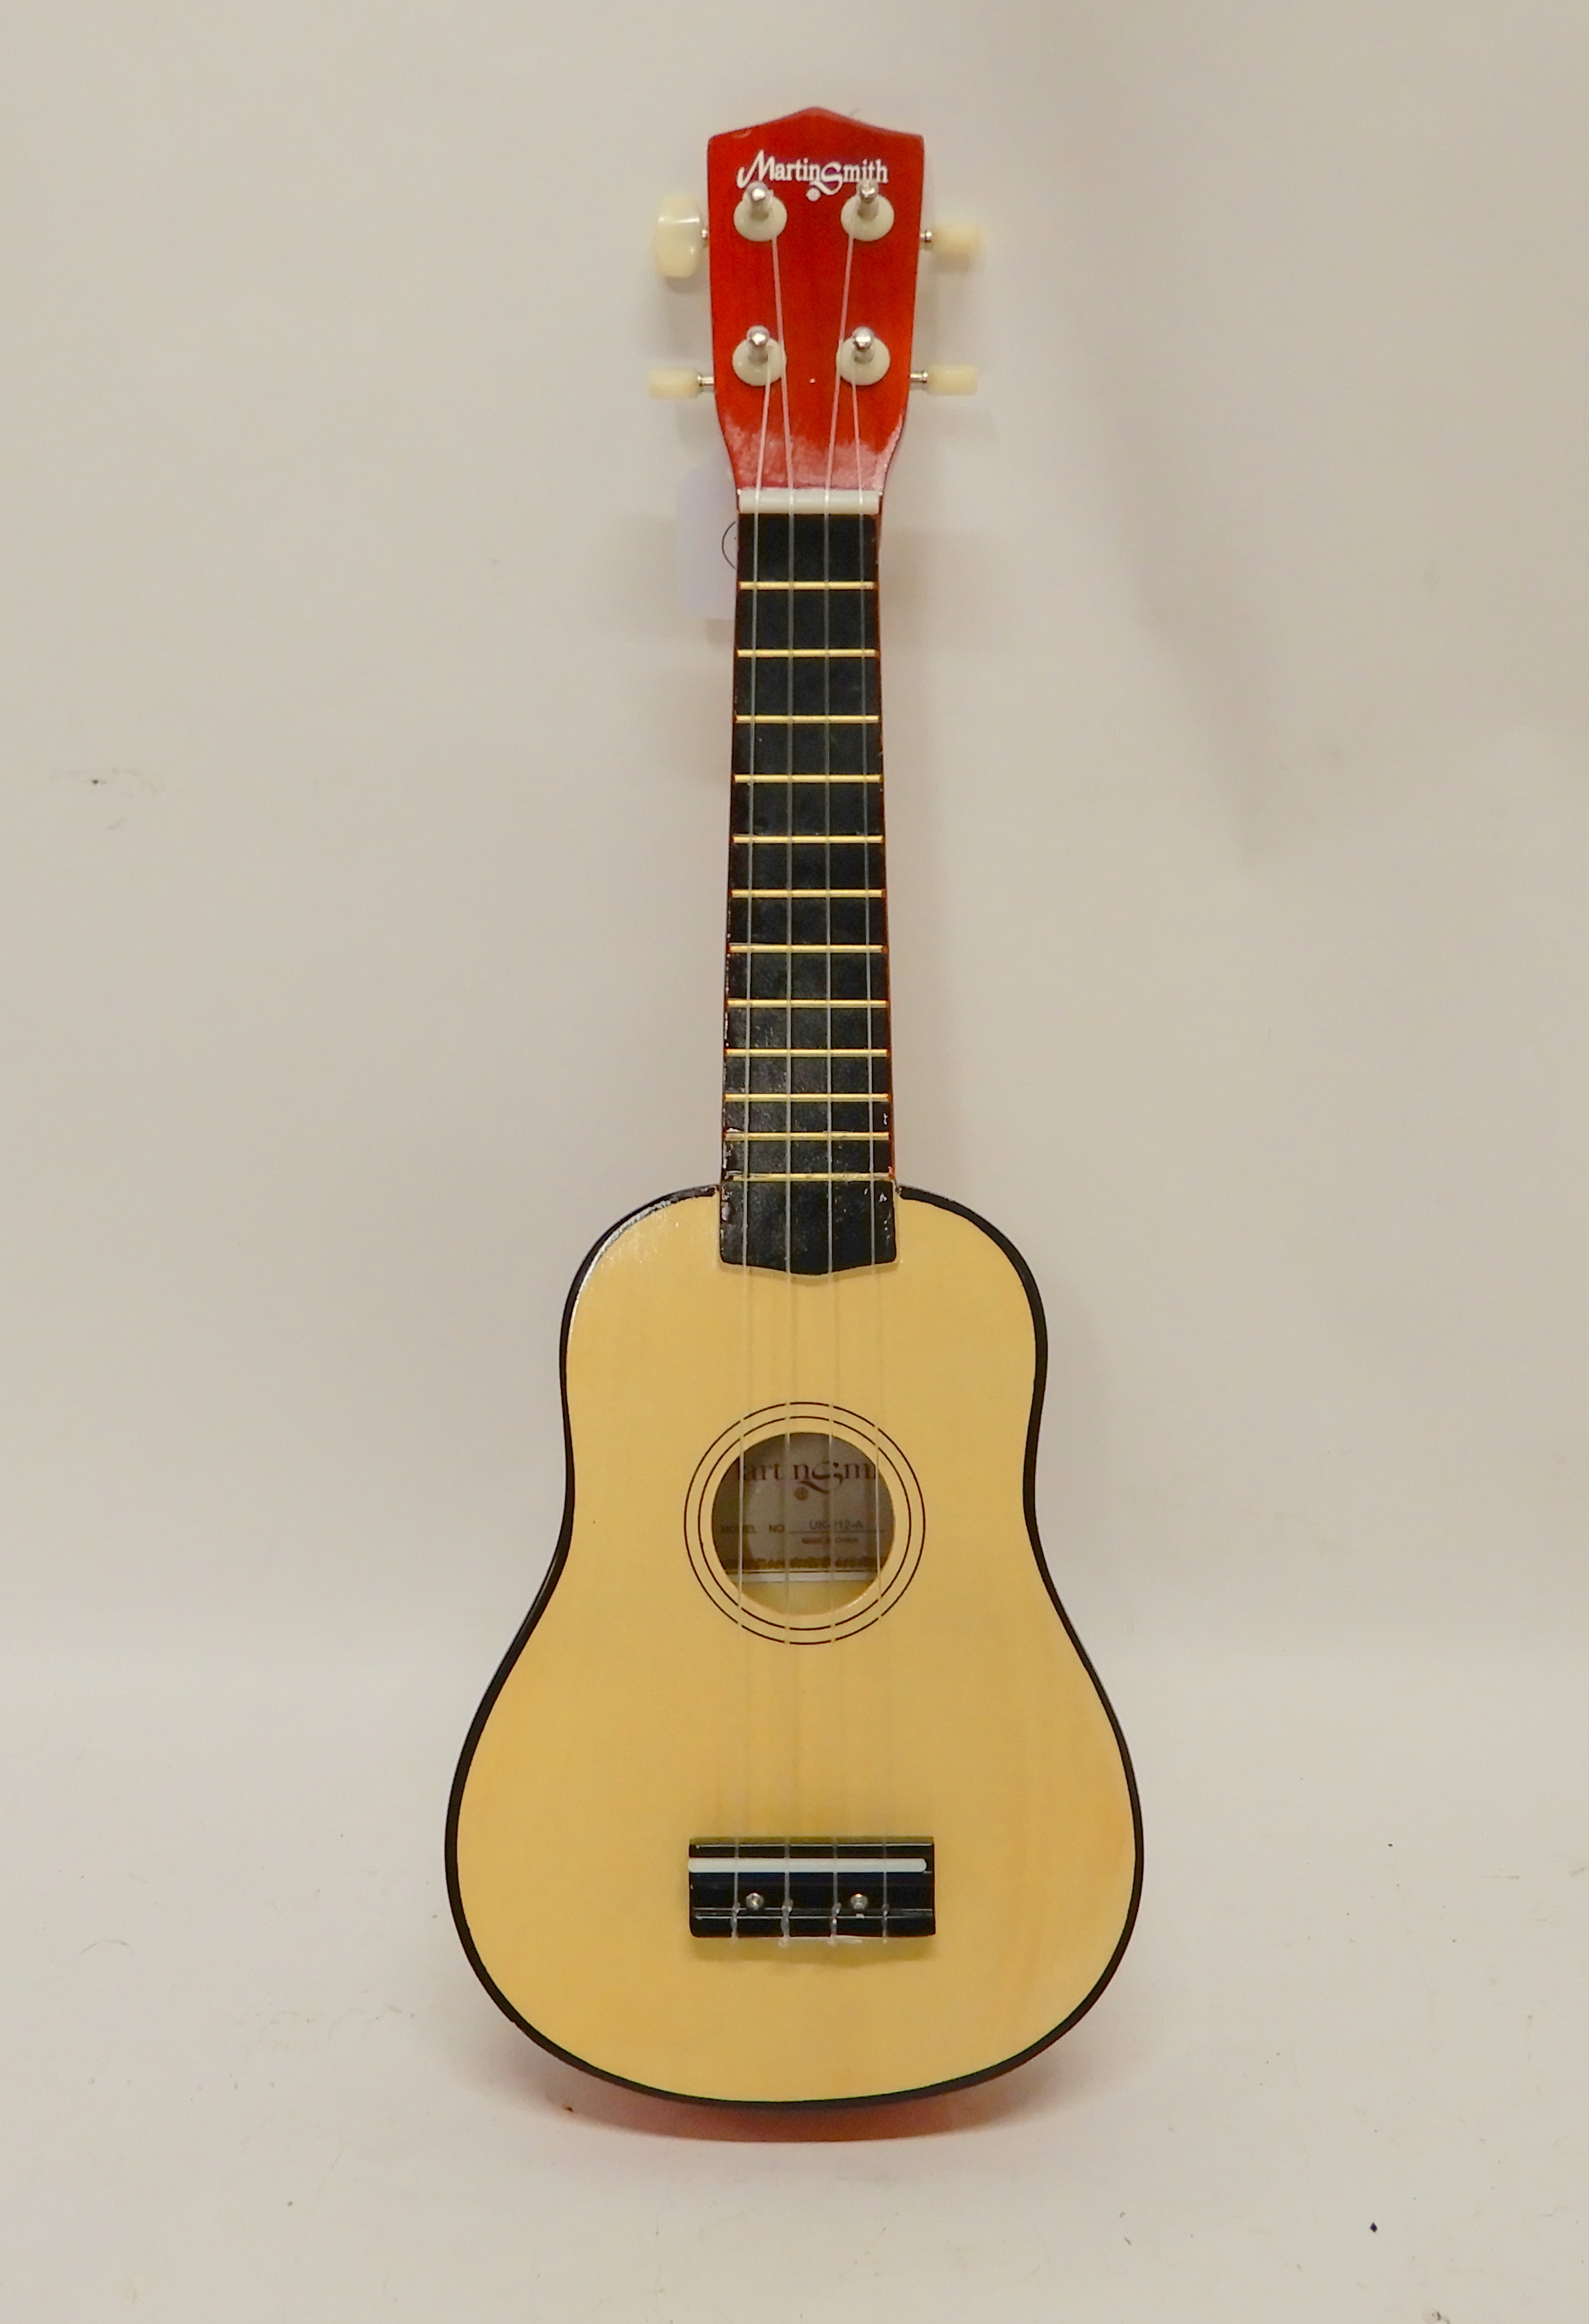 A Martin Smith Ukulele UK-212-A Condition Report: Available upon request